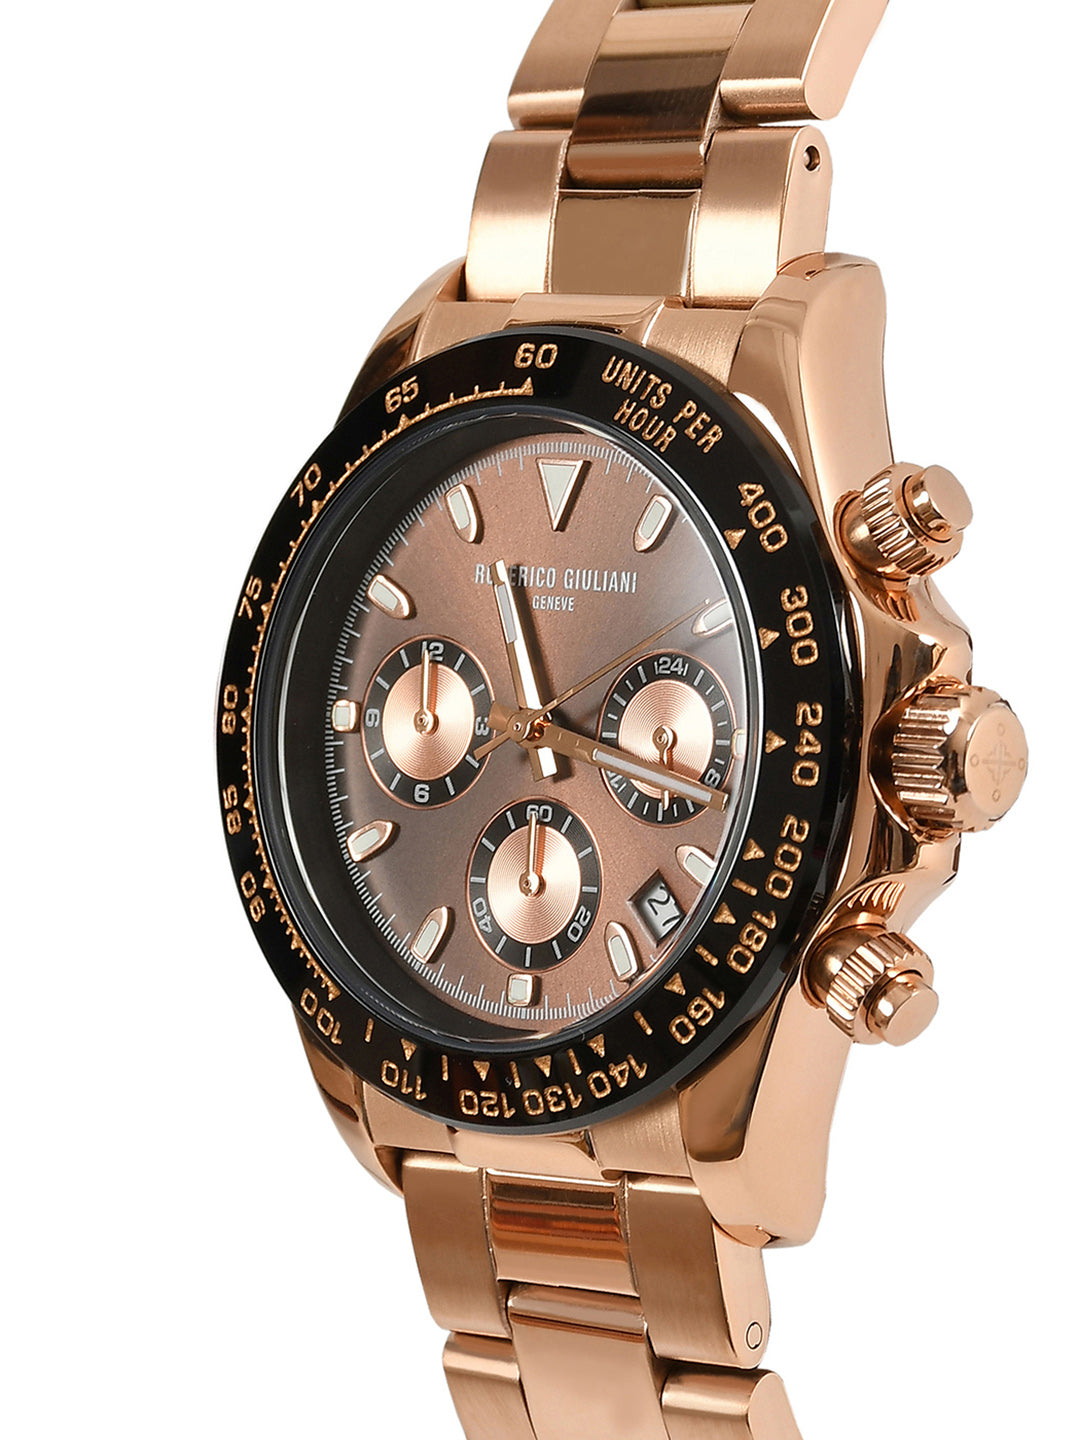 RODERICO GIULIANI ANALOG CHRONOGRAPH ROSE GOLD DIAL ROSE GOLD CASE MEN'S WATCH MSTC-7803